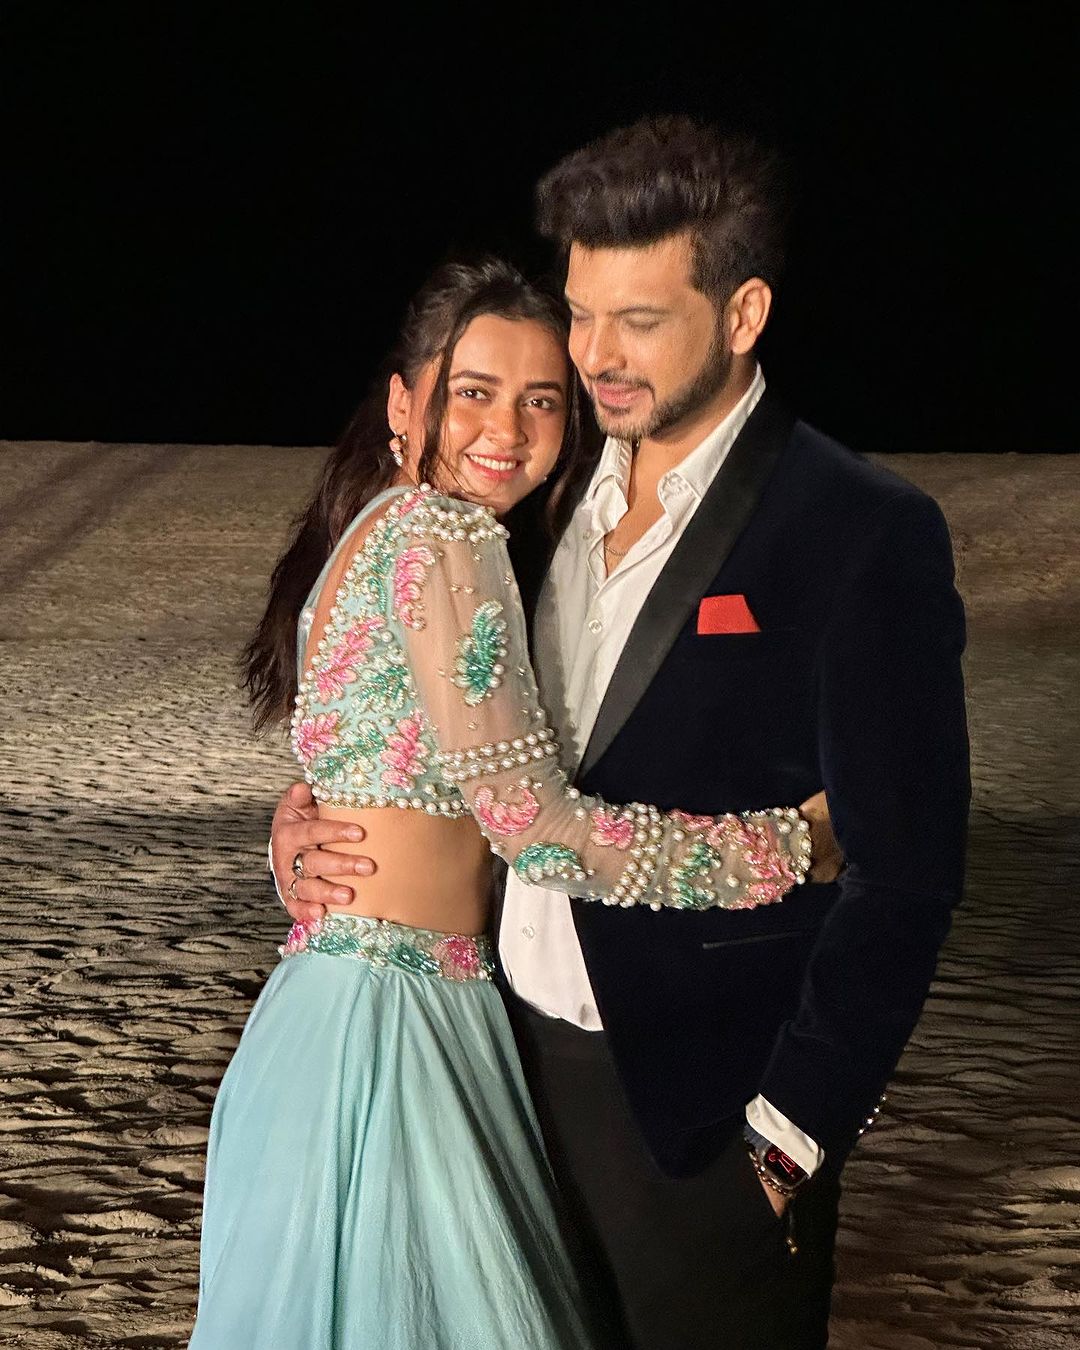 Open up about their relationship: The Famous Love bird Karan Kundrra and Tejasswi Prakash reveal secret about personal life